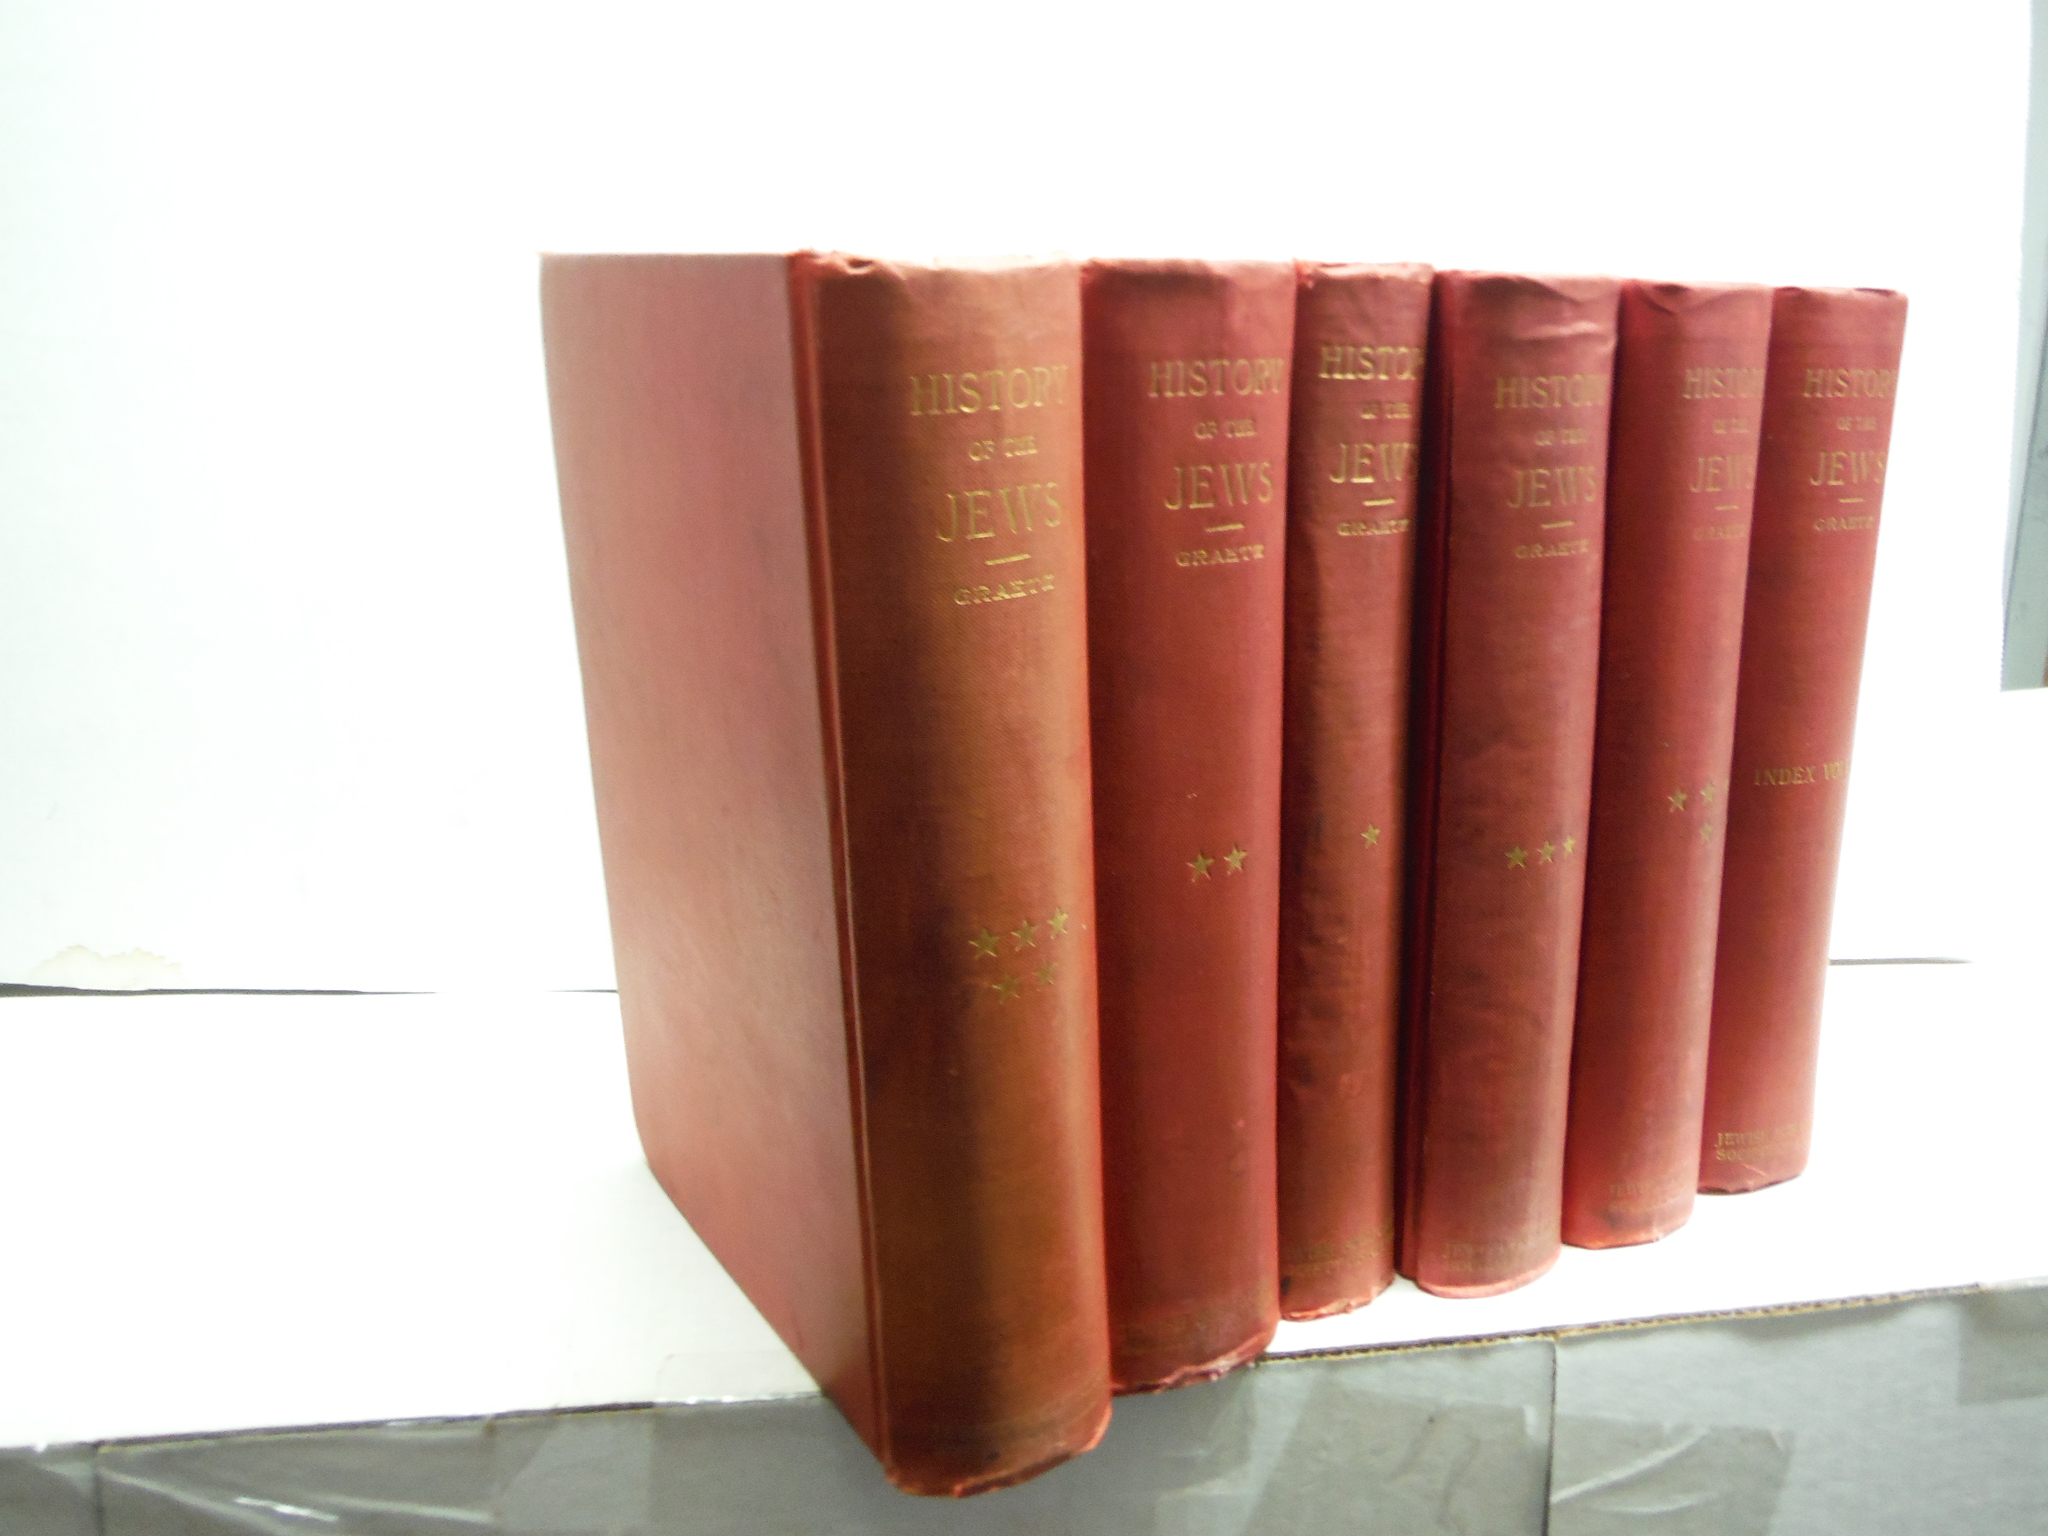 HISTORY OF THE JEWS 6 VOL SET From the Earliest Times to the Present Day